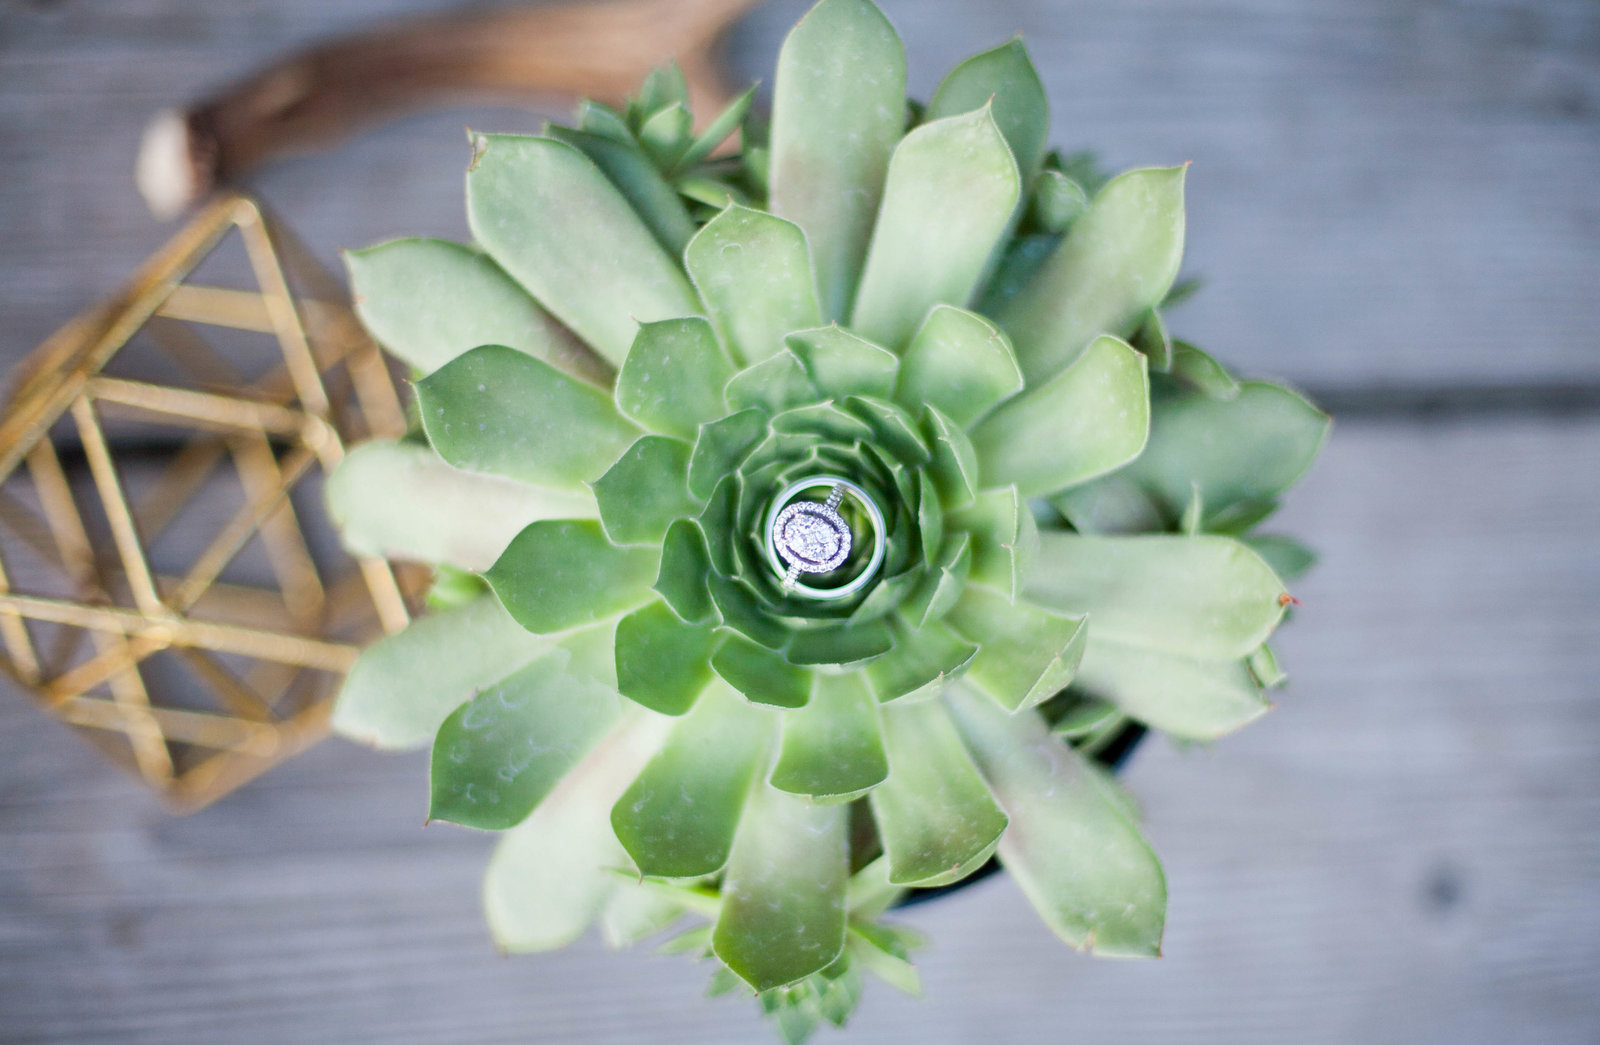 A pair of wedding rings sitting on a green succulent.